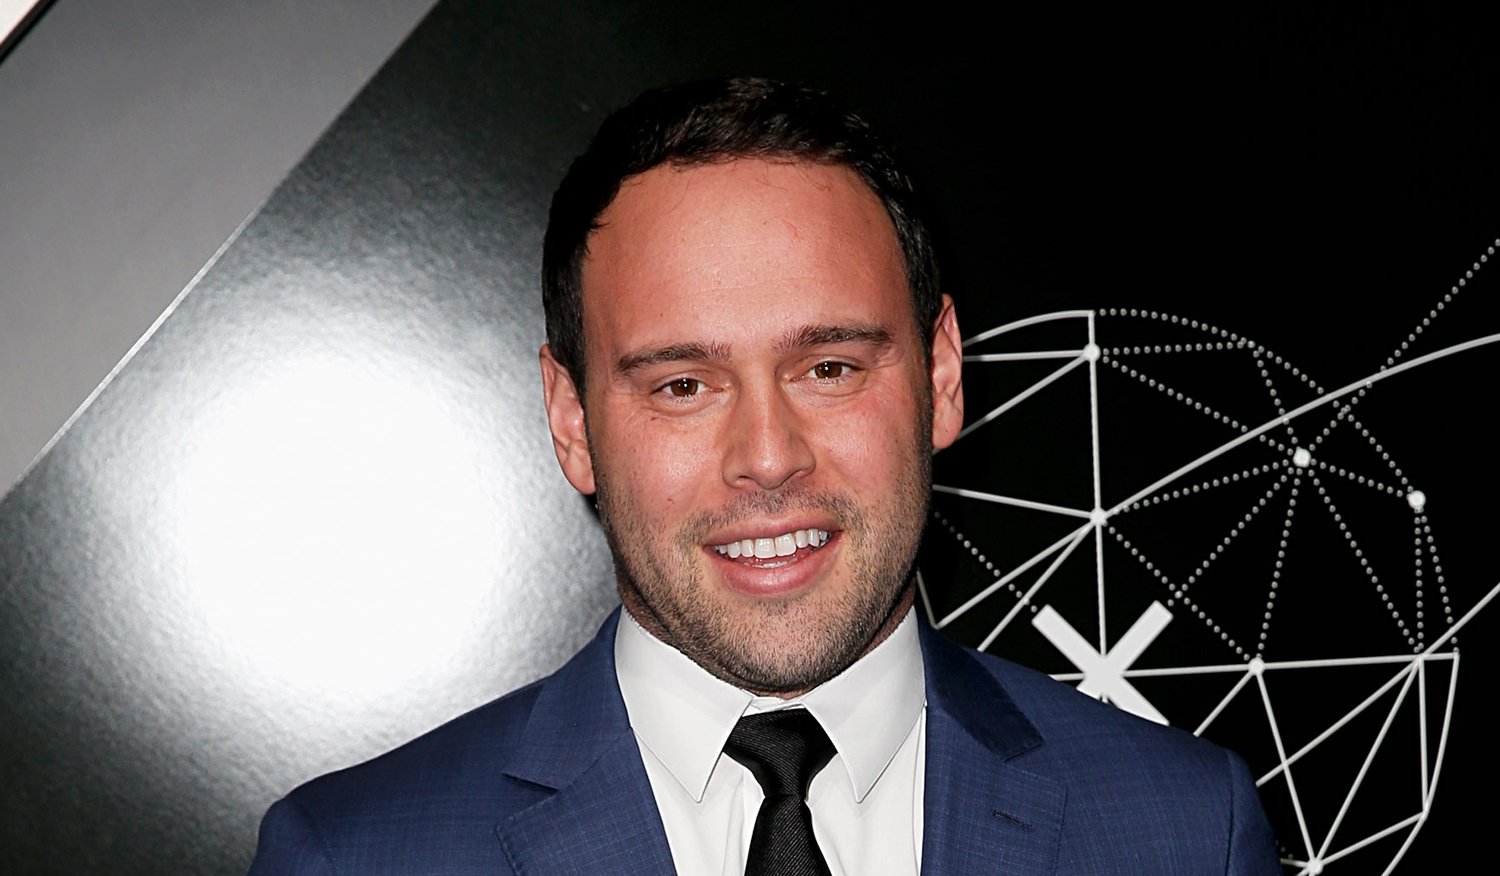 15 Music Stars Who Left Scooter Braun: Former Clients Revealed